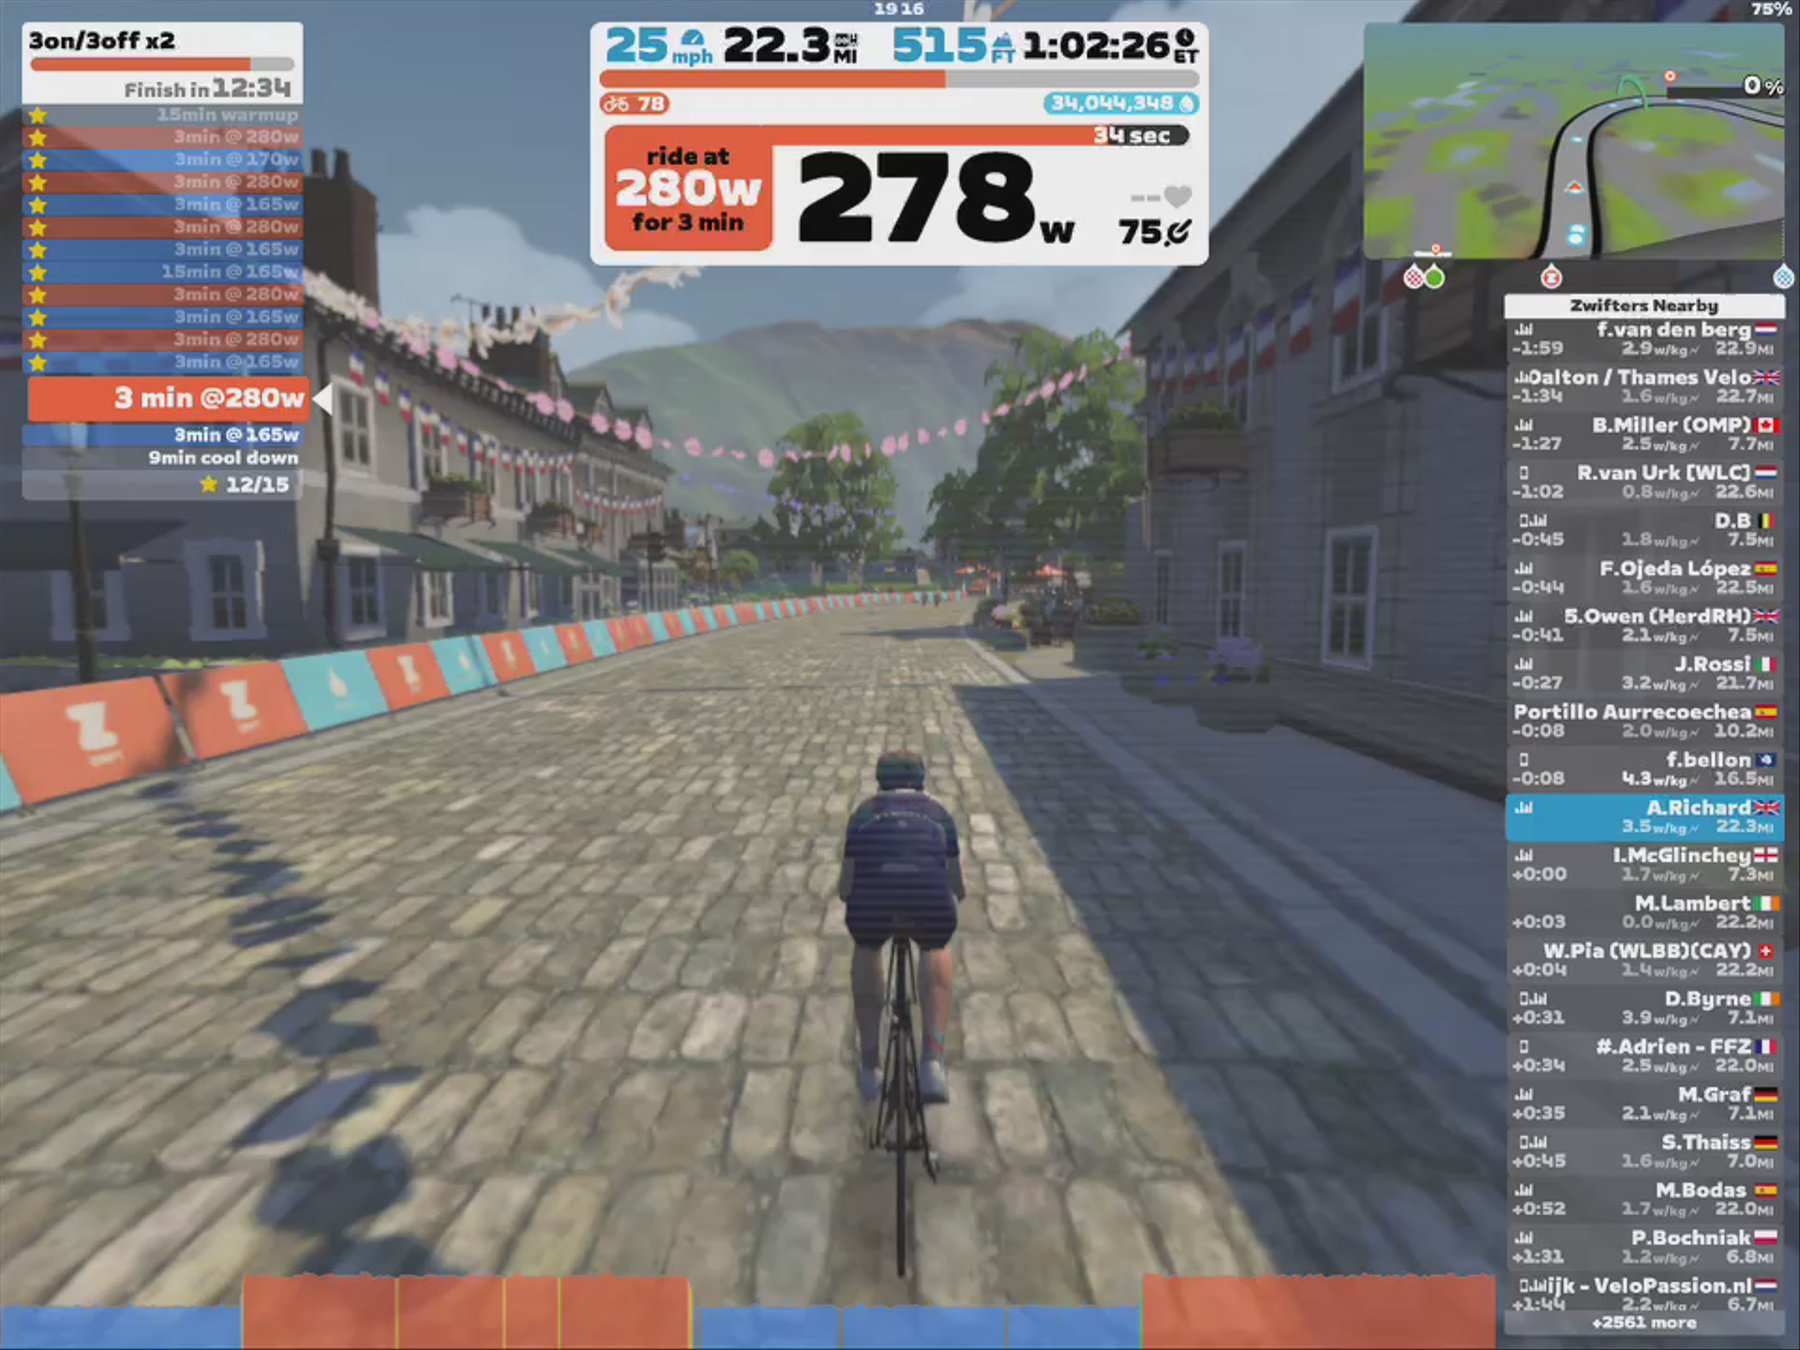 Zwift - 3on/3off x2 in France